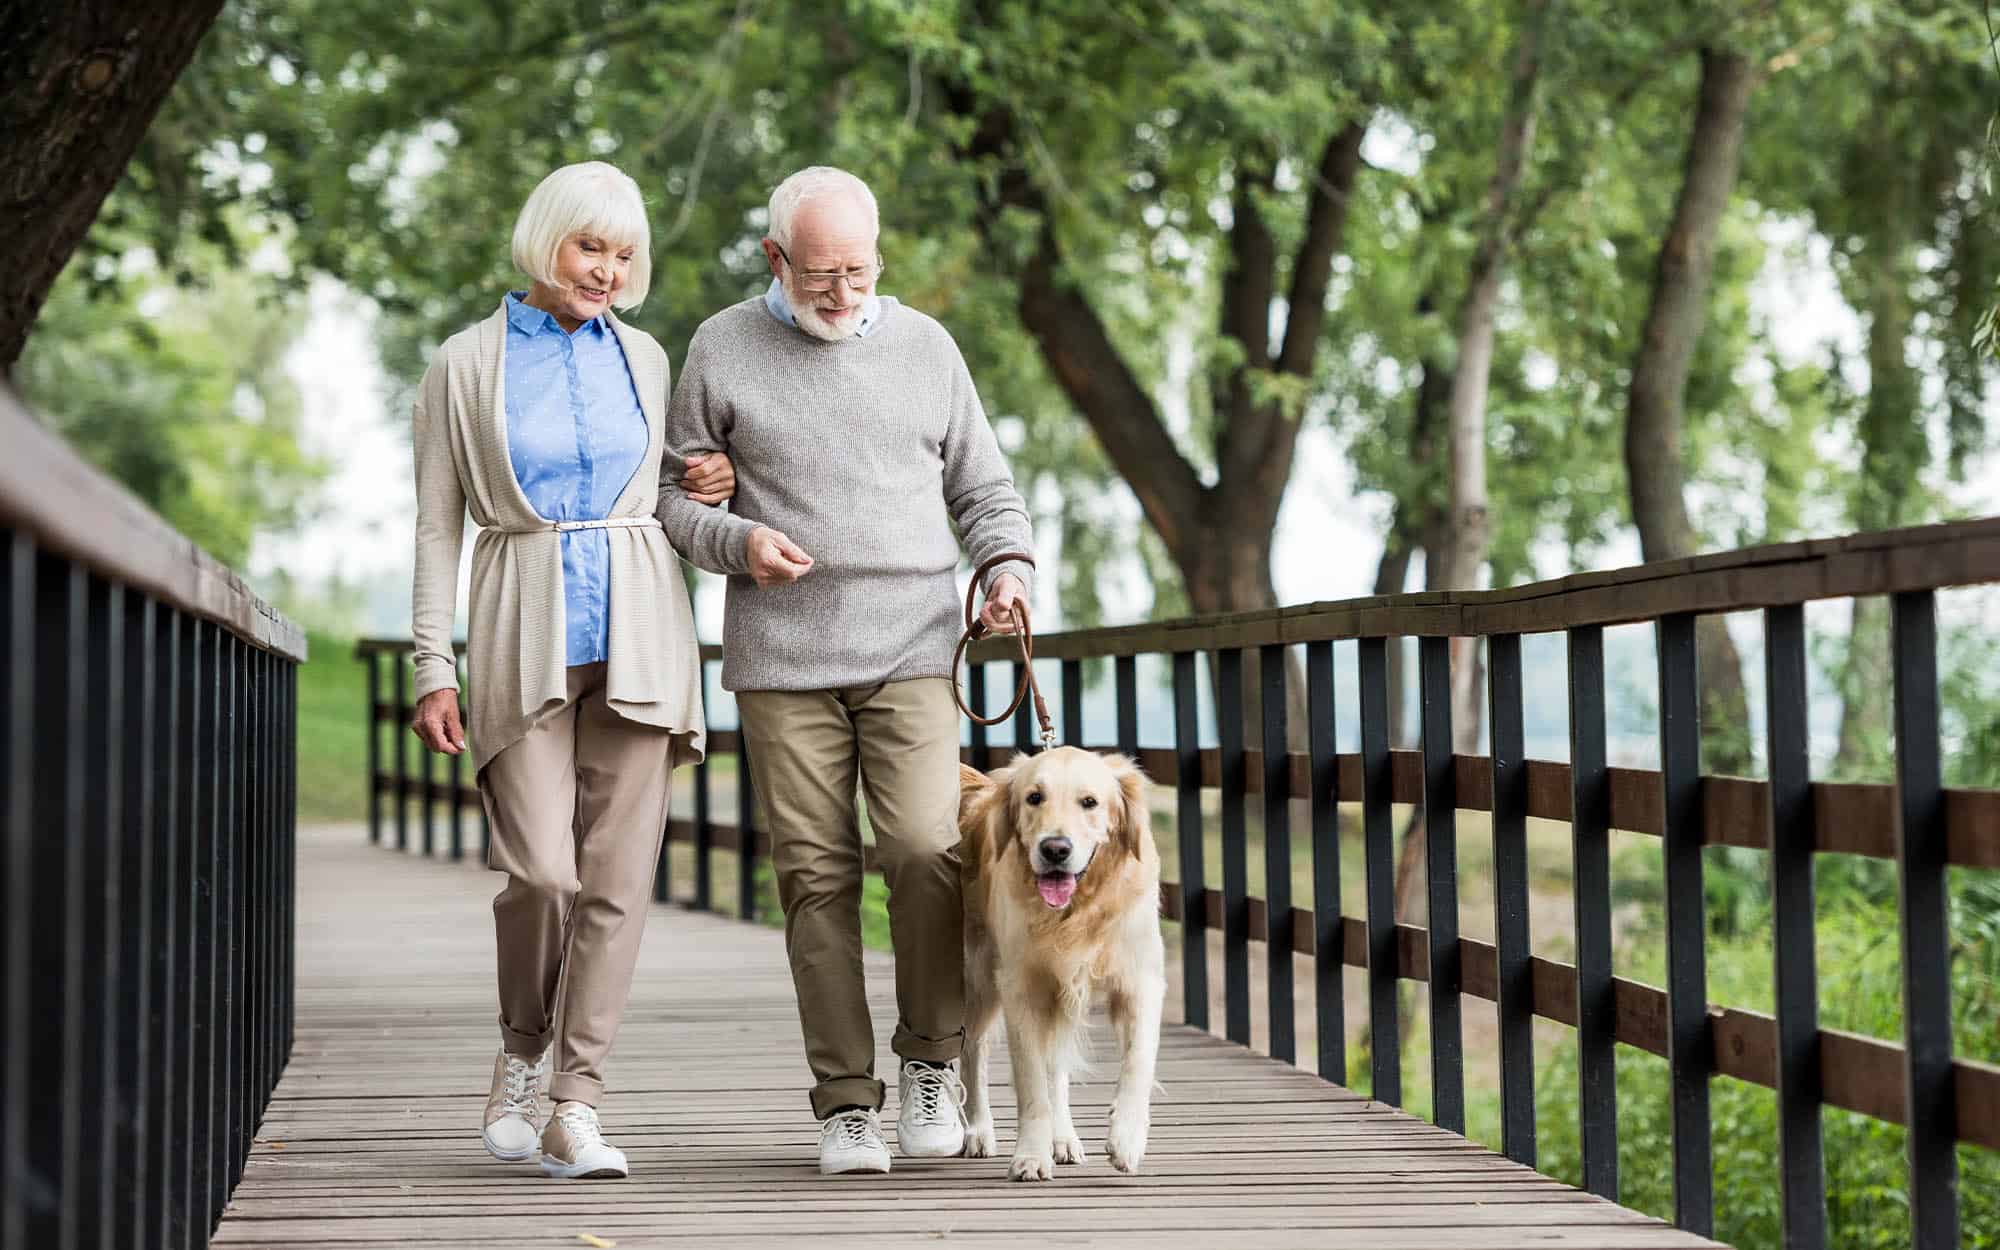 Two seniors walking with a dog